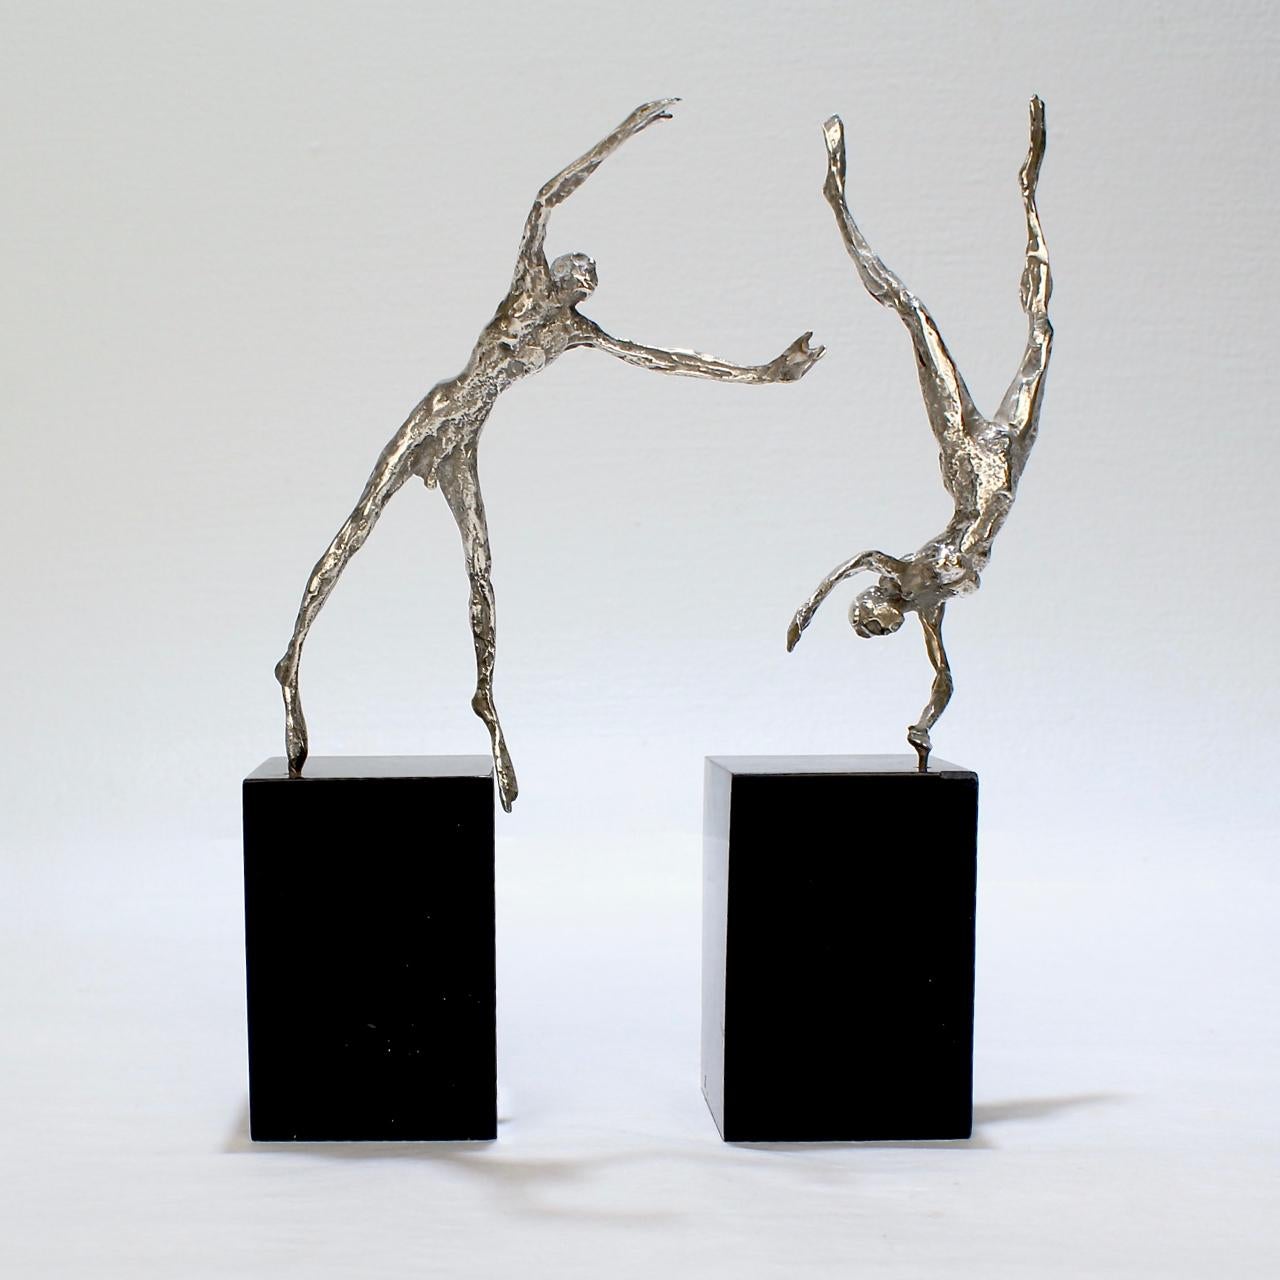 A very fine pair of cabinet-sized silver figurines by Stanley Bleifeld.

Modeled as Adam and Eve falling from the Grace of Eden.

Mounted with pins on black marble plinths. The figures can spin in their mounts and can be positioned in varying